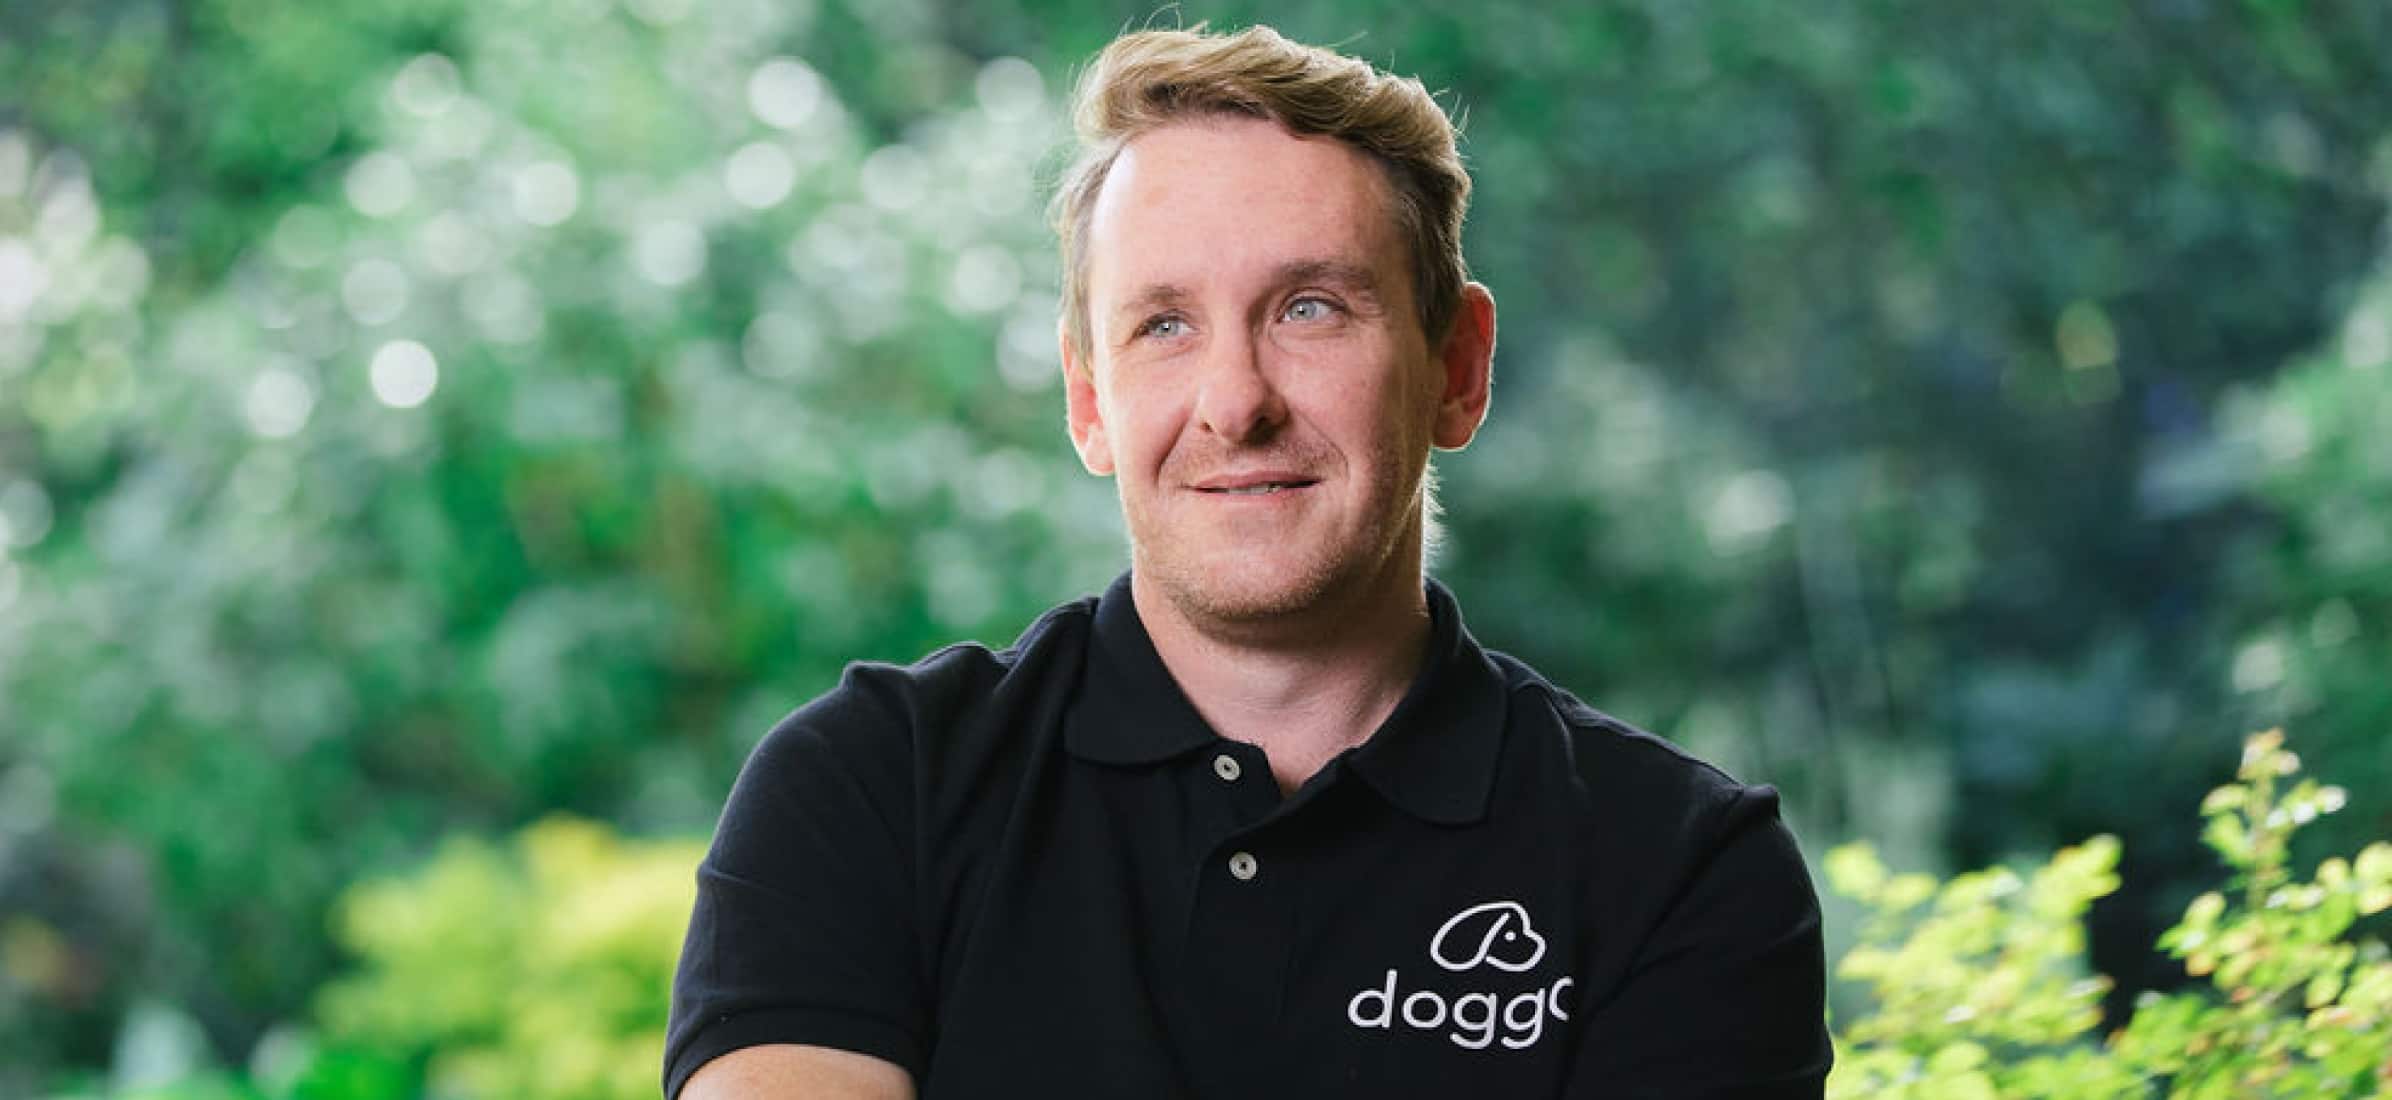 Graeme Bettles wearing his Doggo polo shirt and smiling.